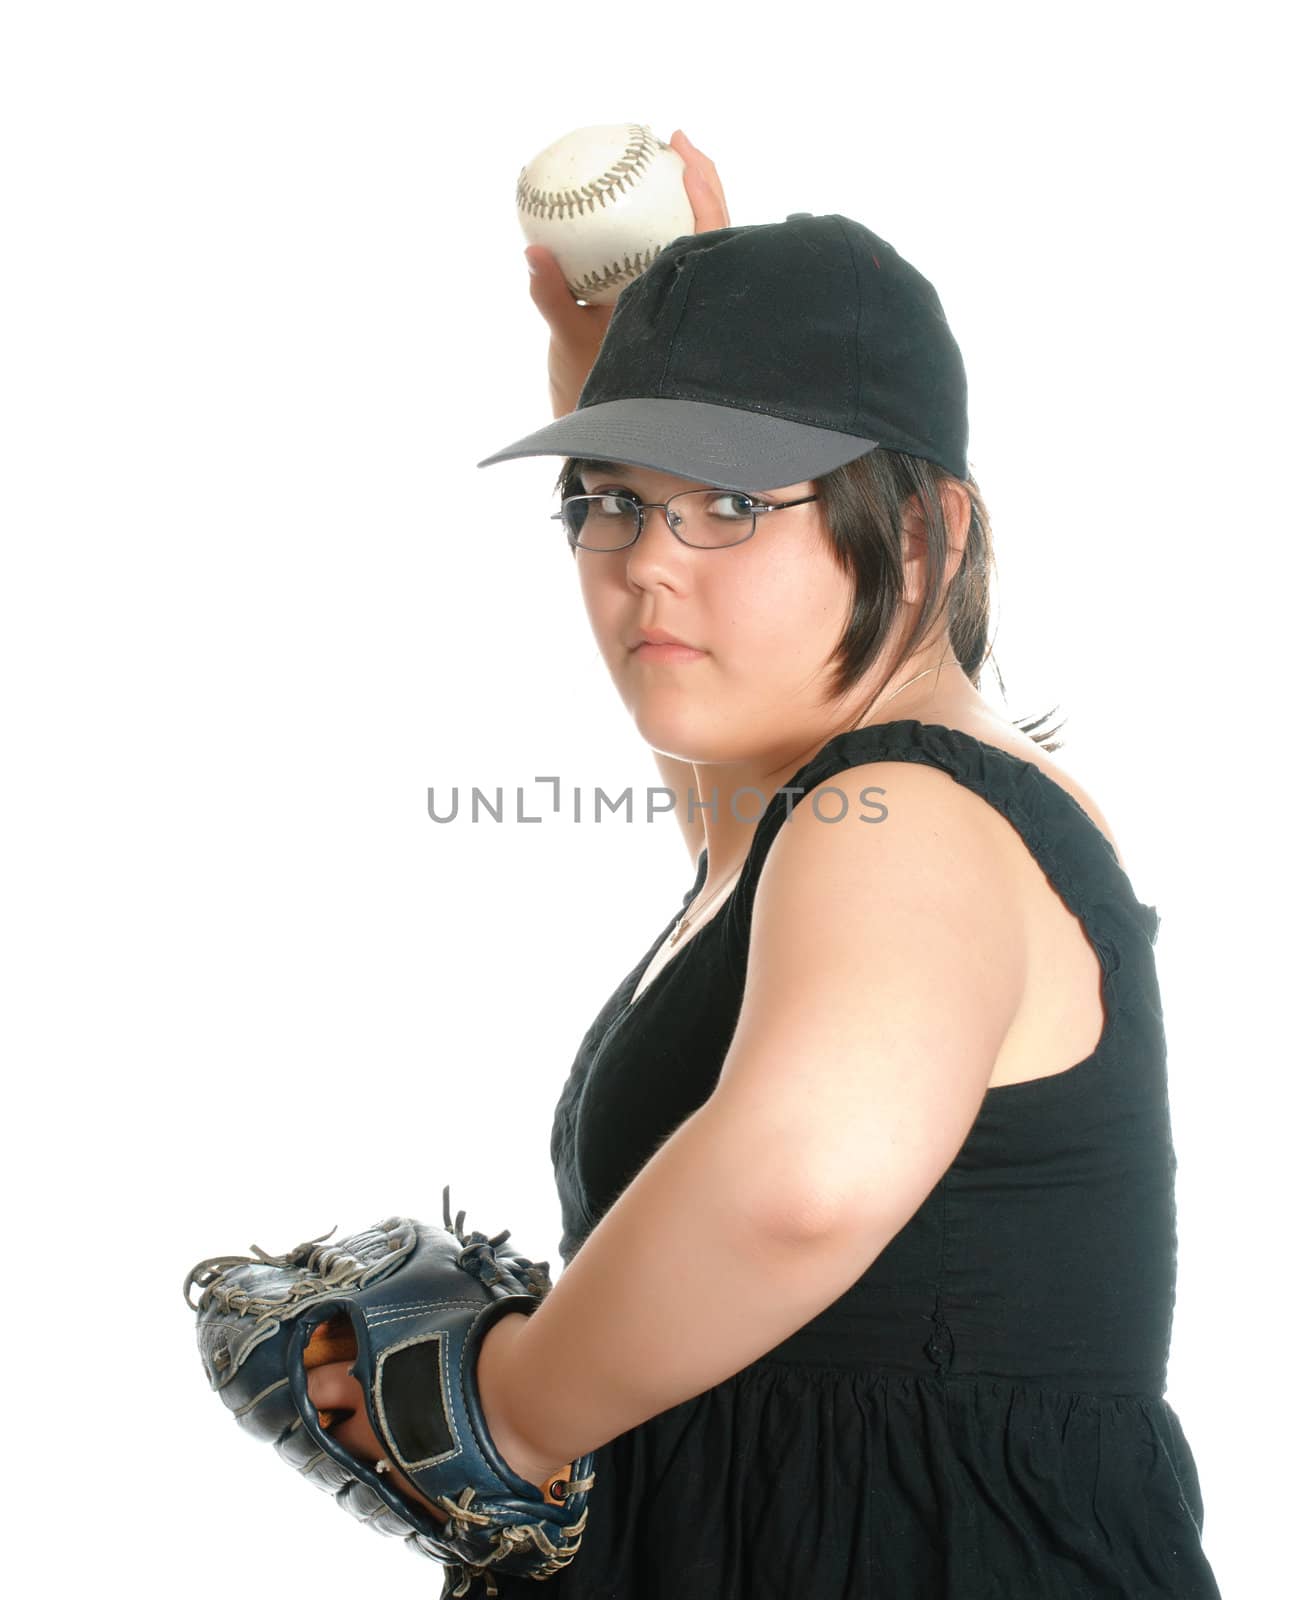 A young preteen girl wearing a baseball cap is in the process of pitching a baseball, isolated against a white background.